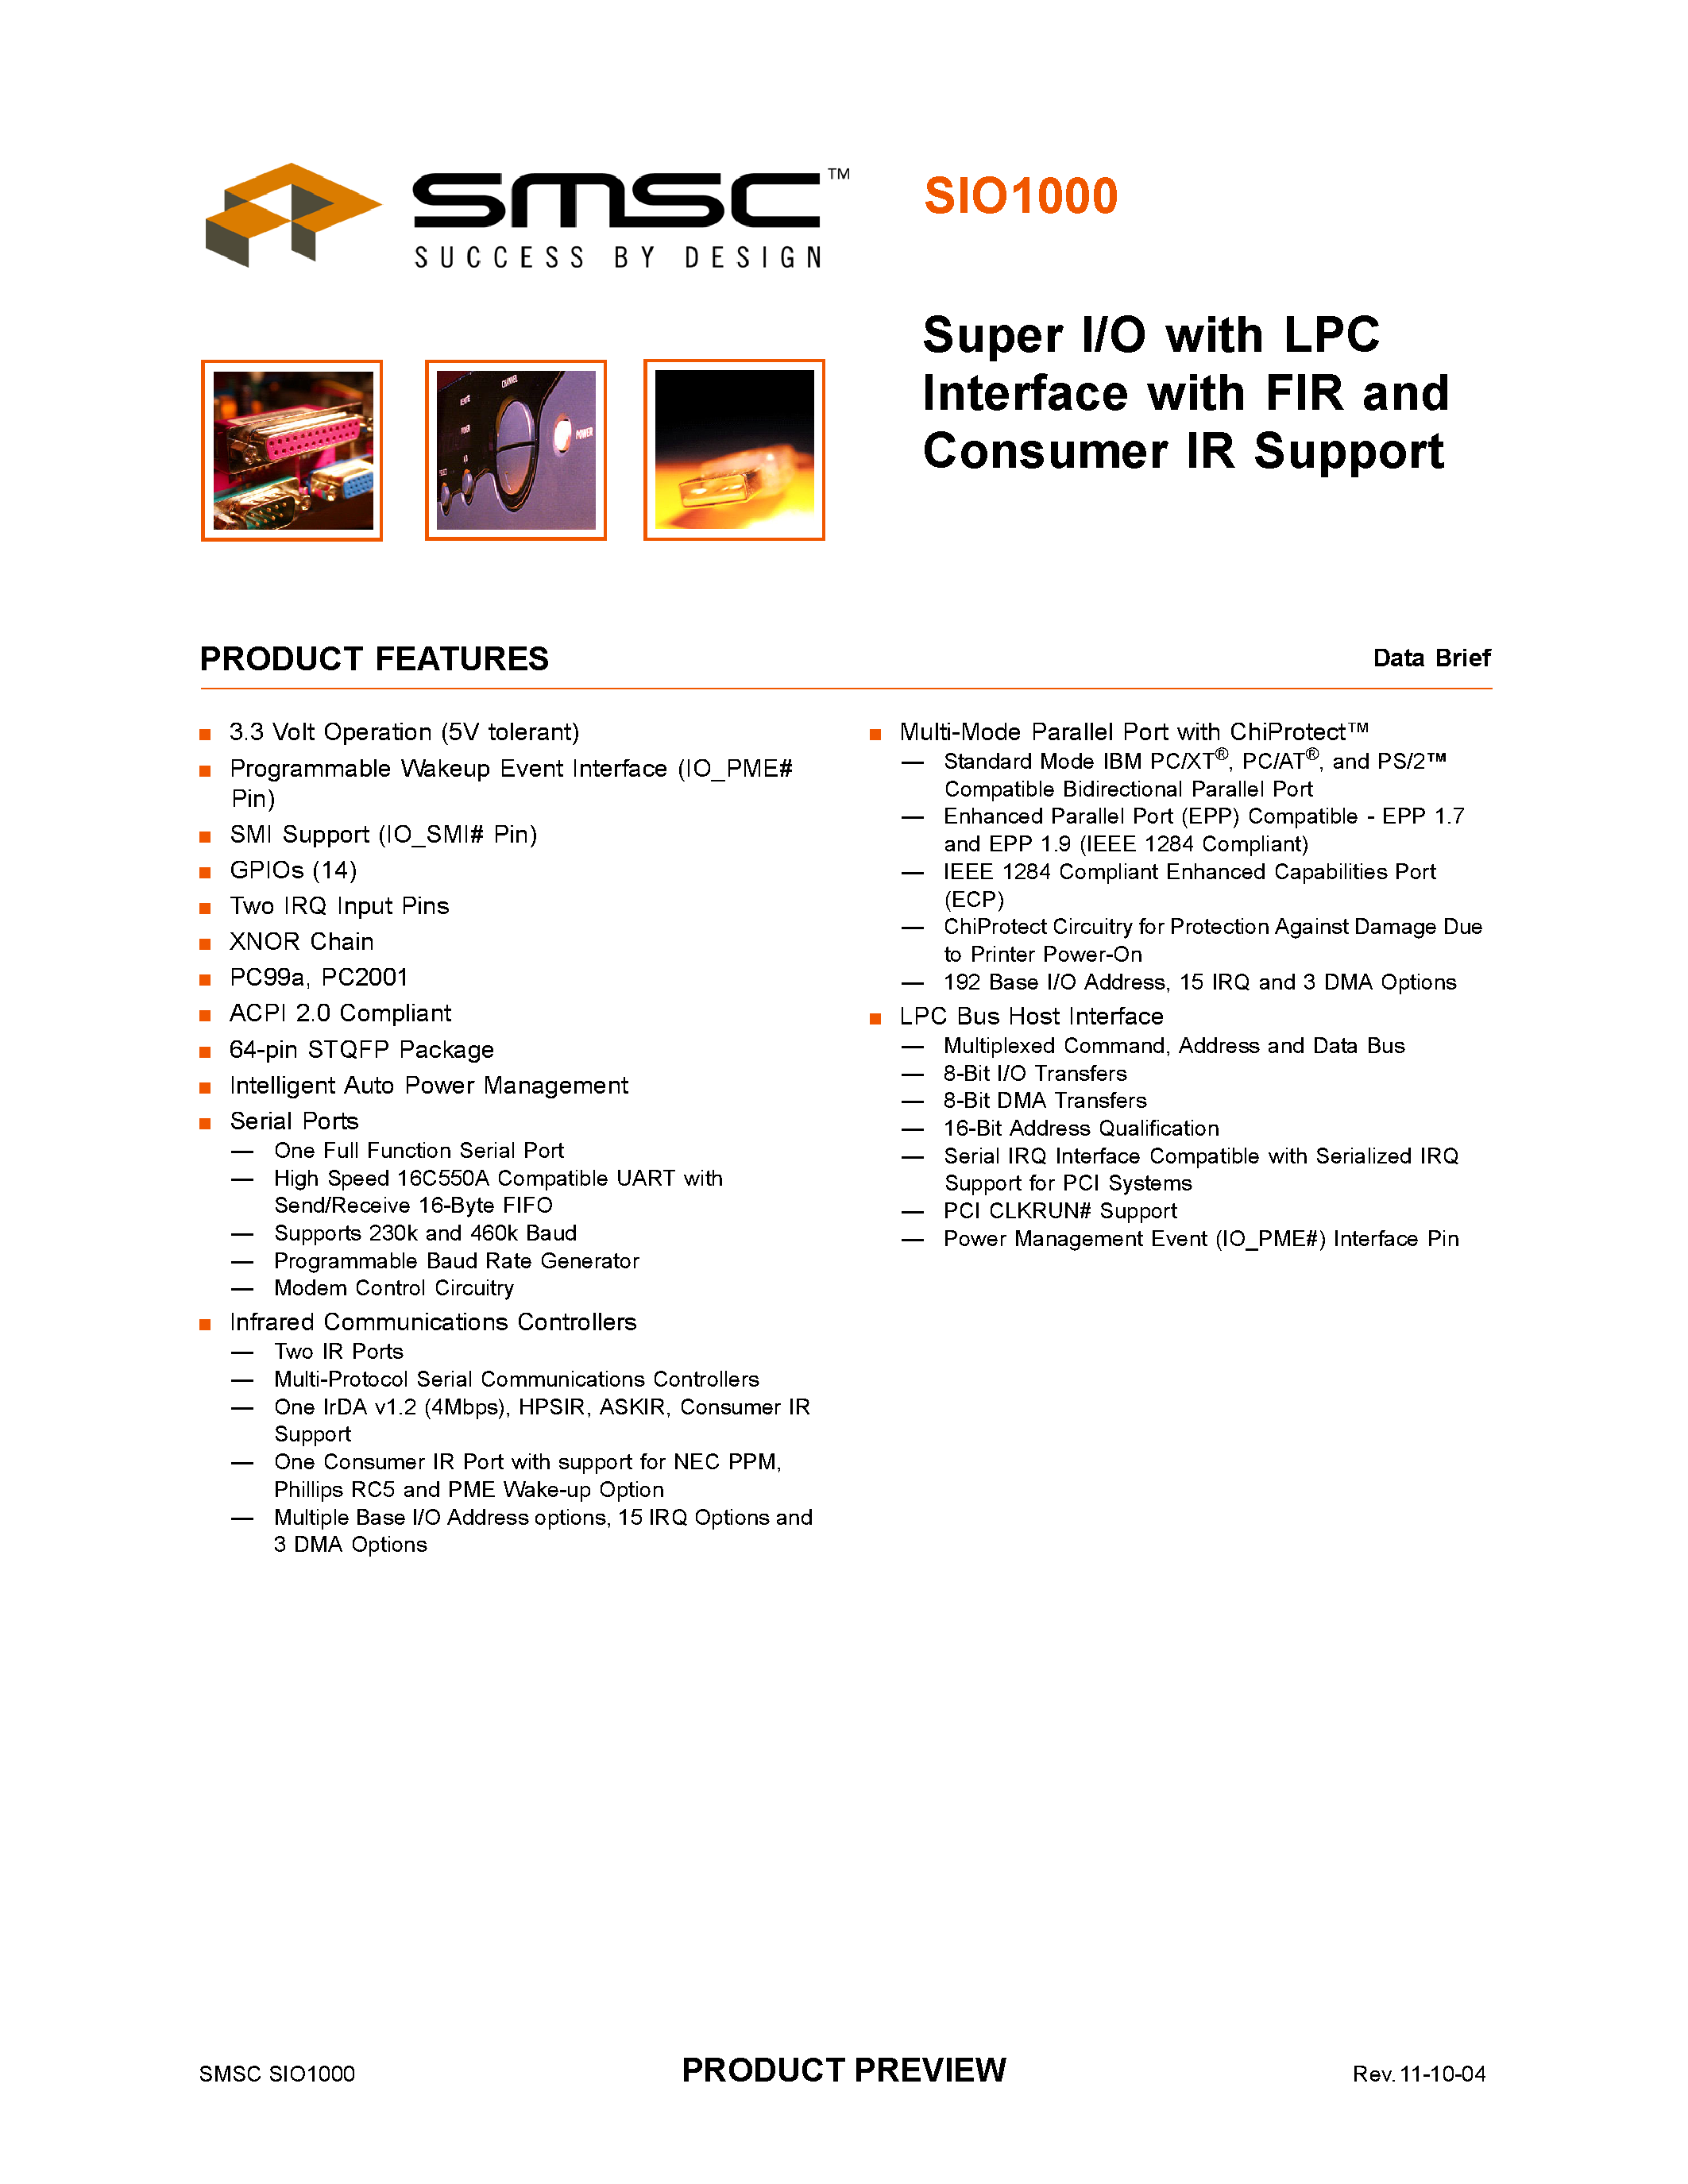 Datasheet SIO1000-JN - SUPER I/O WITH LPC INTERFACE WITH FIR AND CONSUMER IR SUPPORT page 1